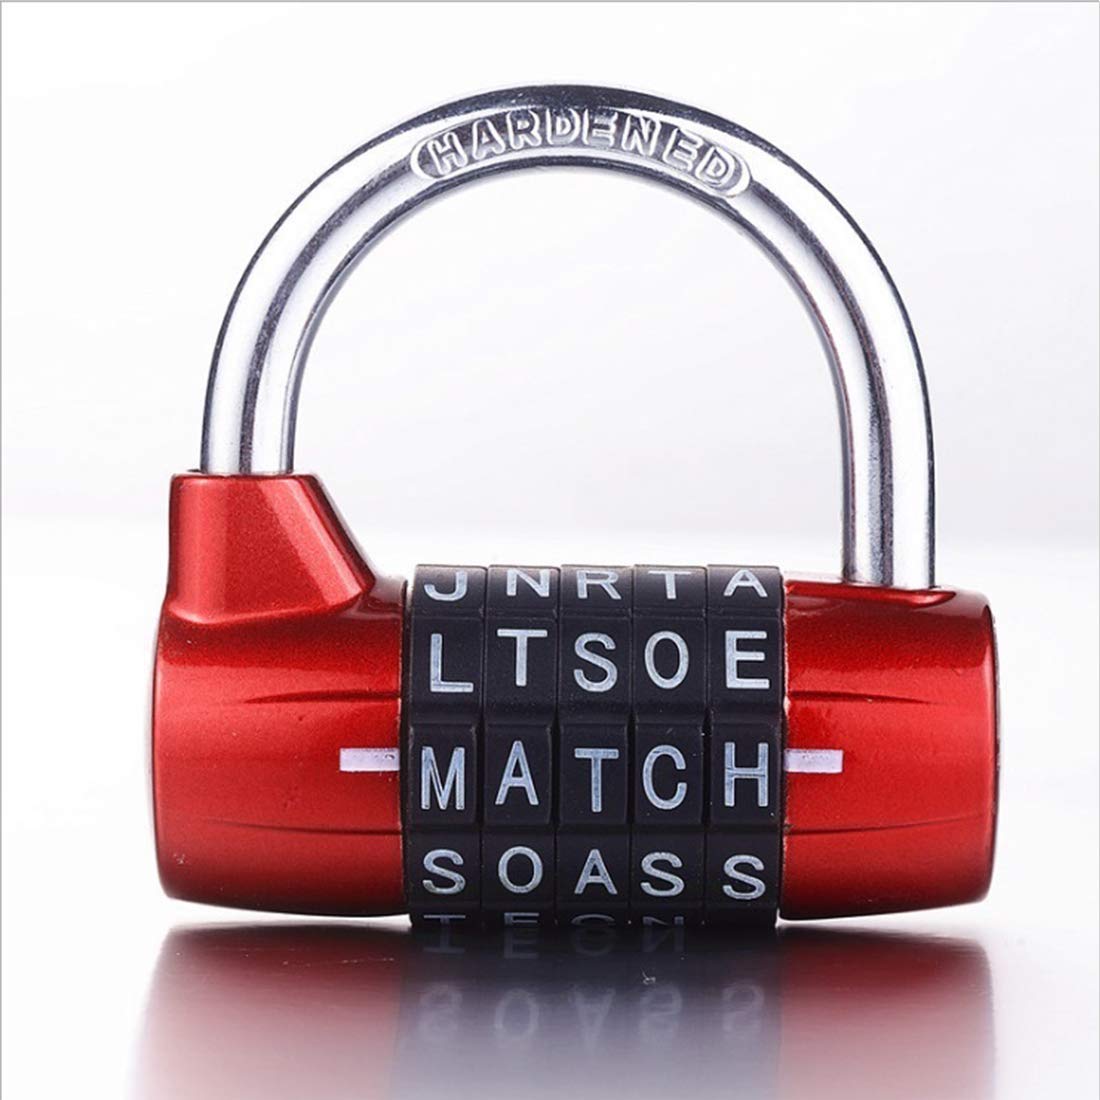 A padlock with a red X mark.